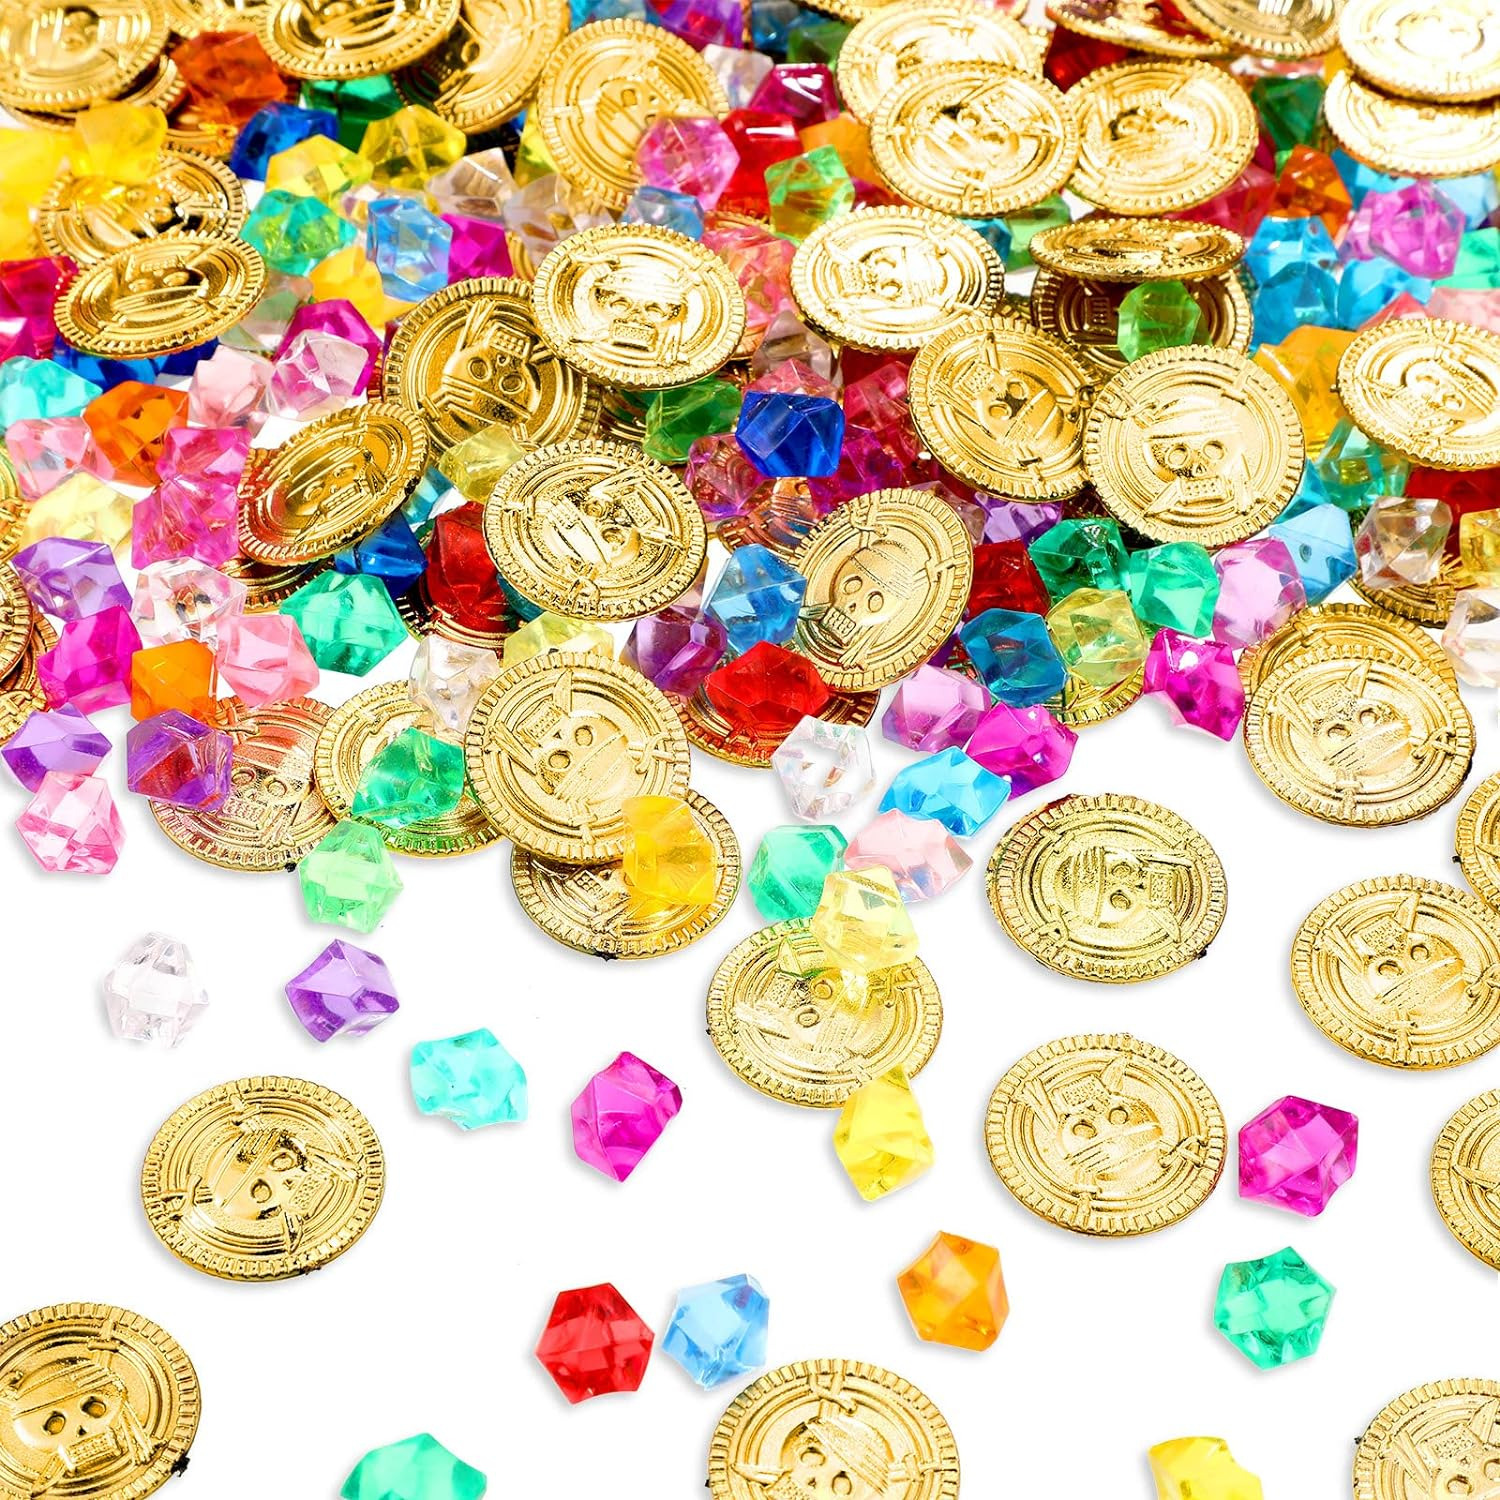 Pirate Treasure 100 Pieces Gold Coins and 100 Pieces Gem Jewelry Treasure Fake G